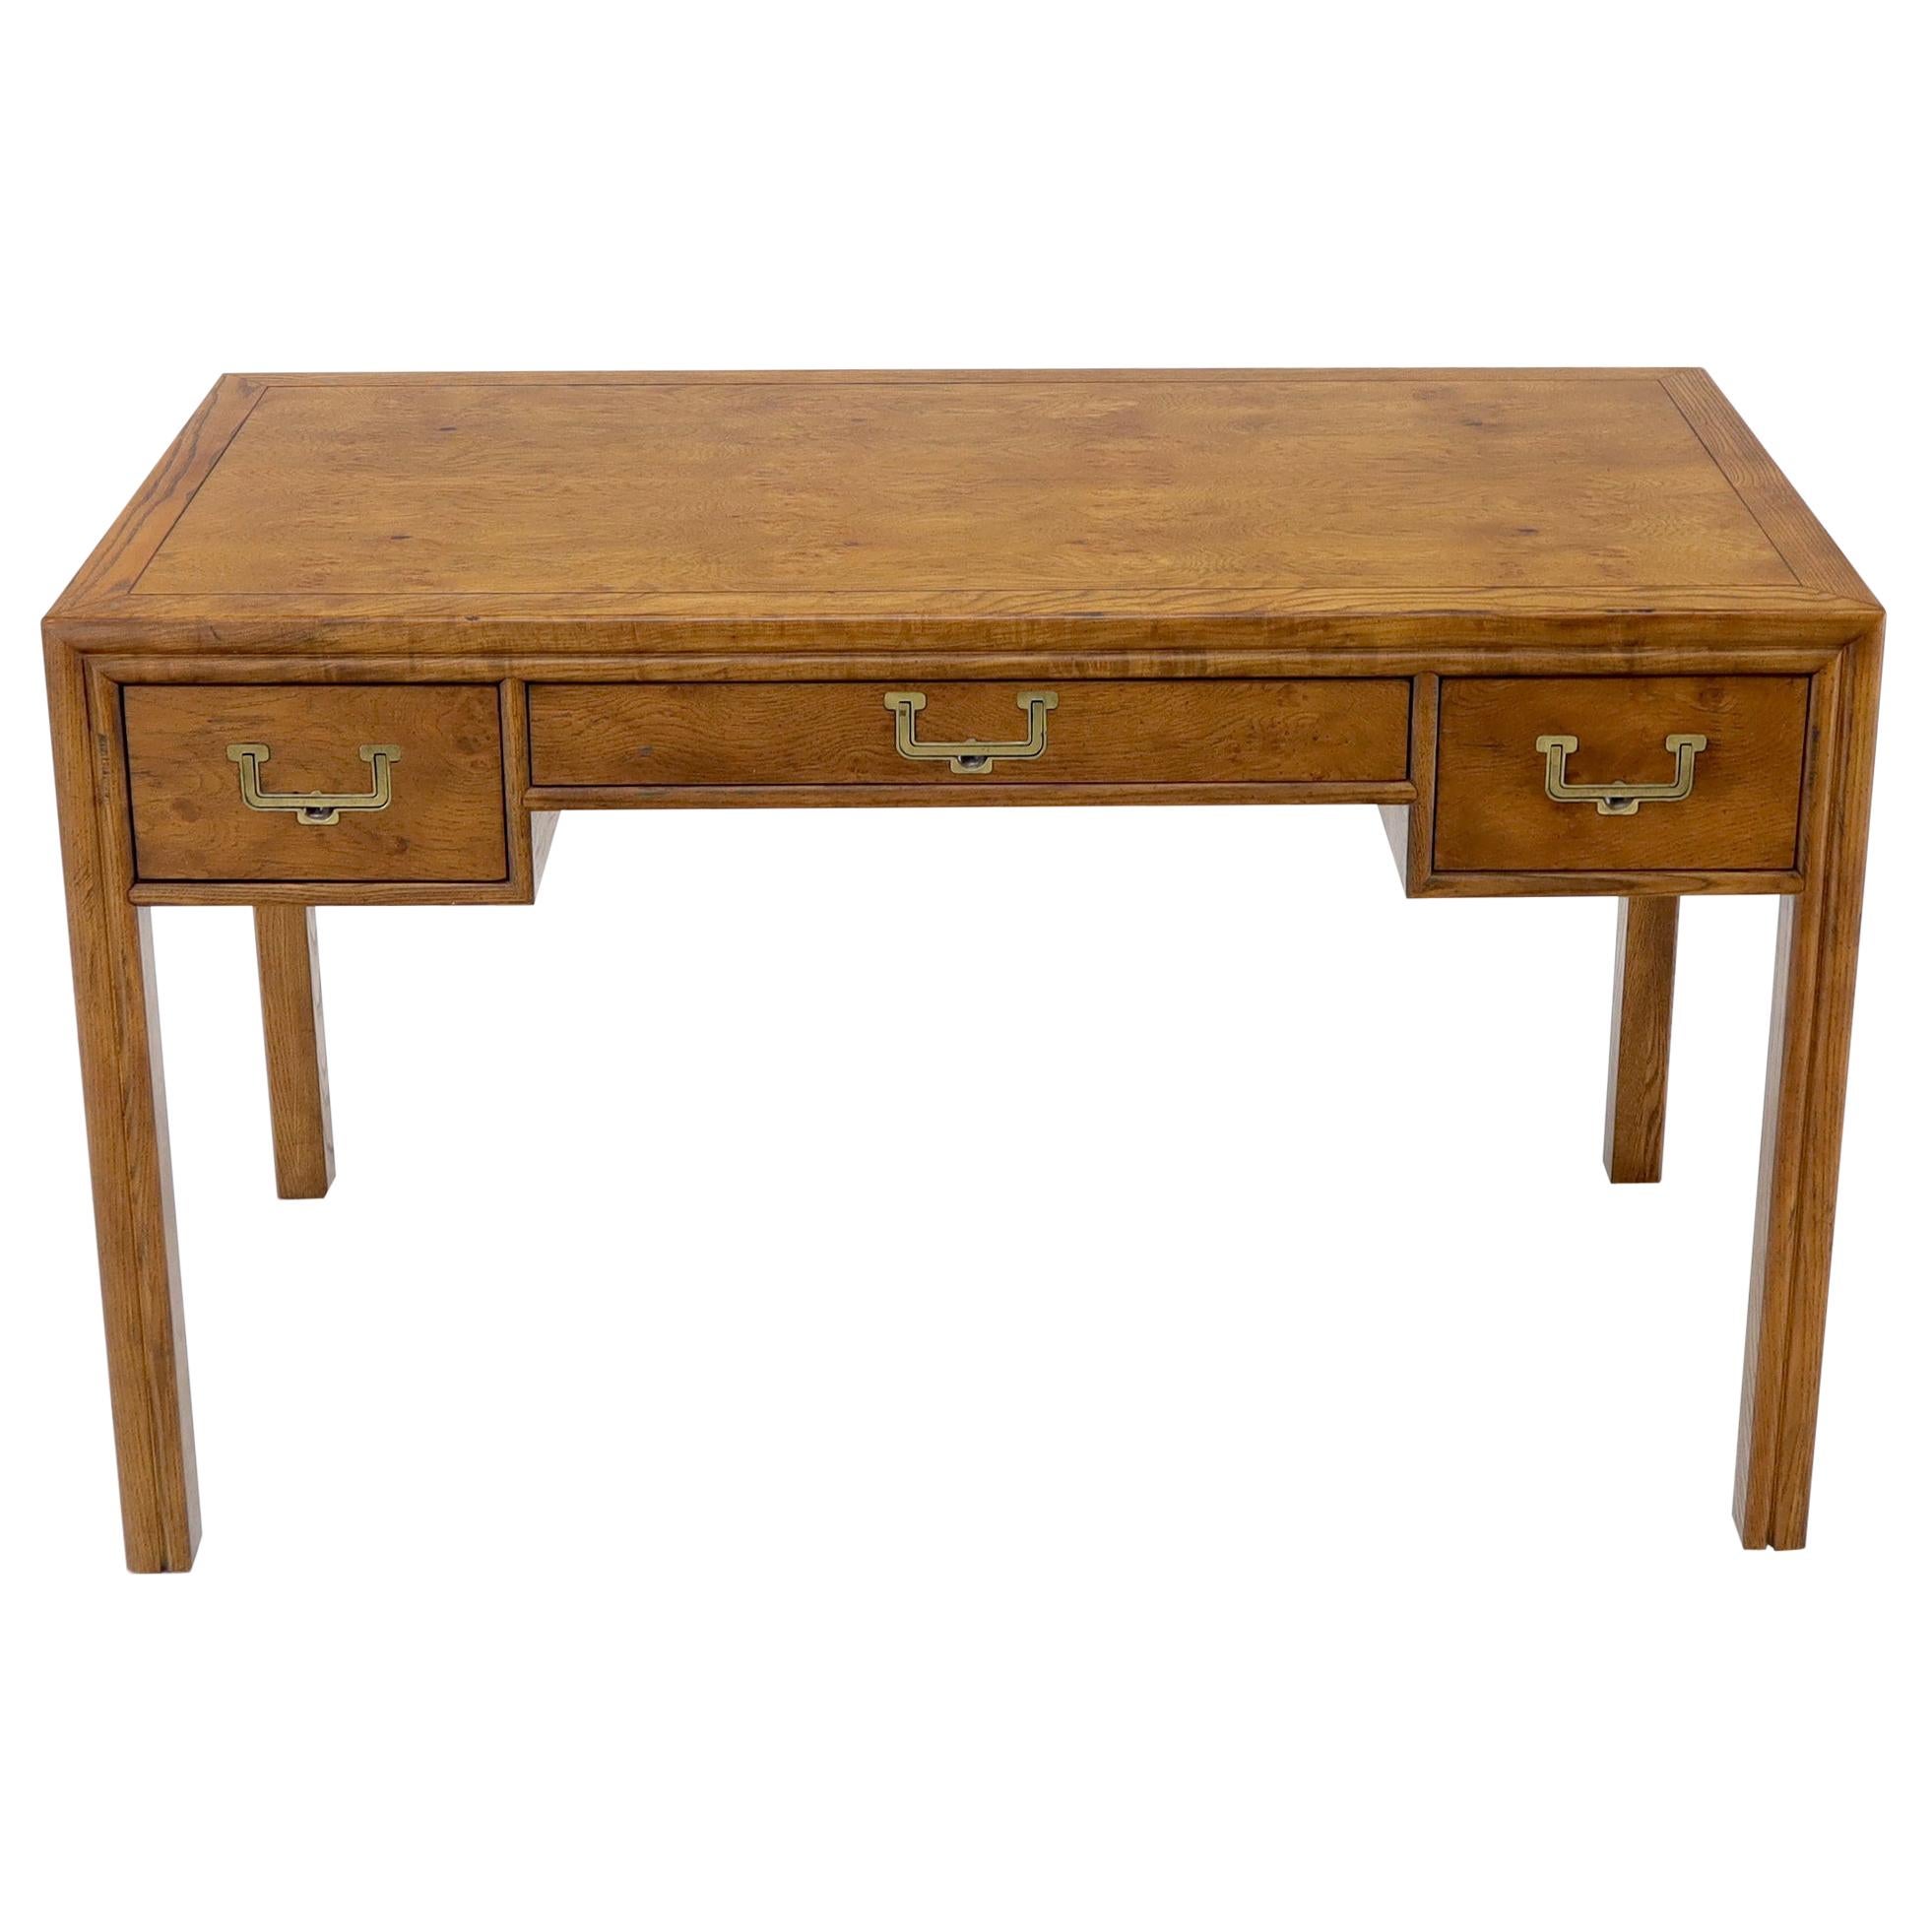 Campaign Mid-Century Modern 3 Drawers Writing Table Desk by Henredon